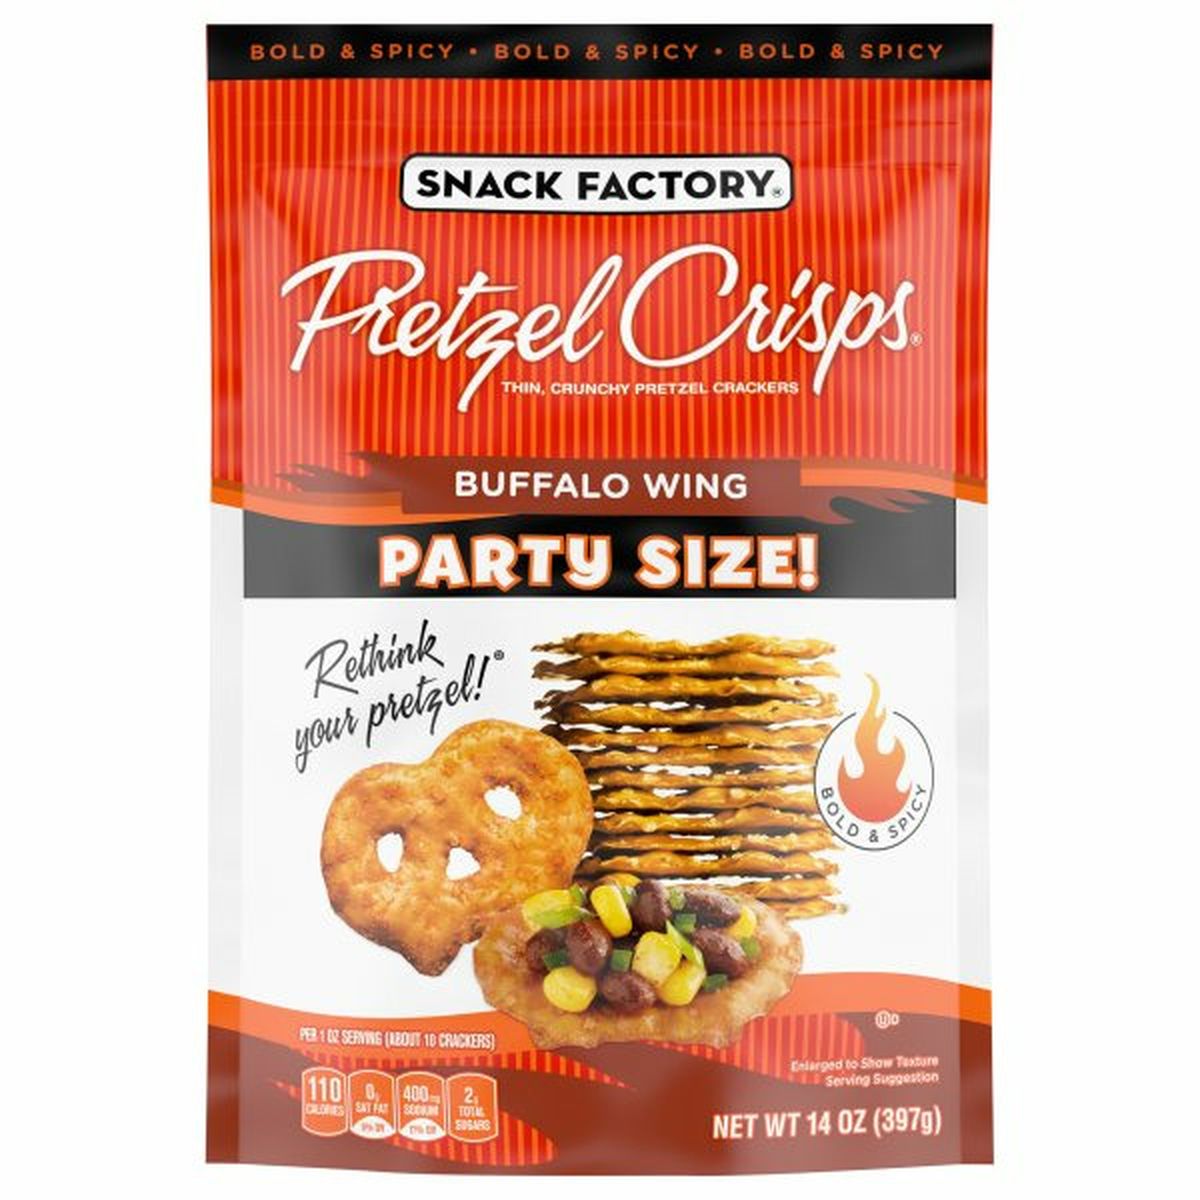 Calories in Snack Factorys Pretzel Crackers, Buffalo Wing, Party Size, Bold & Spicy